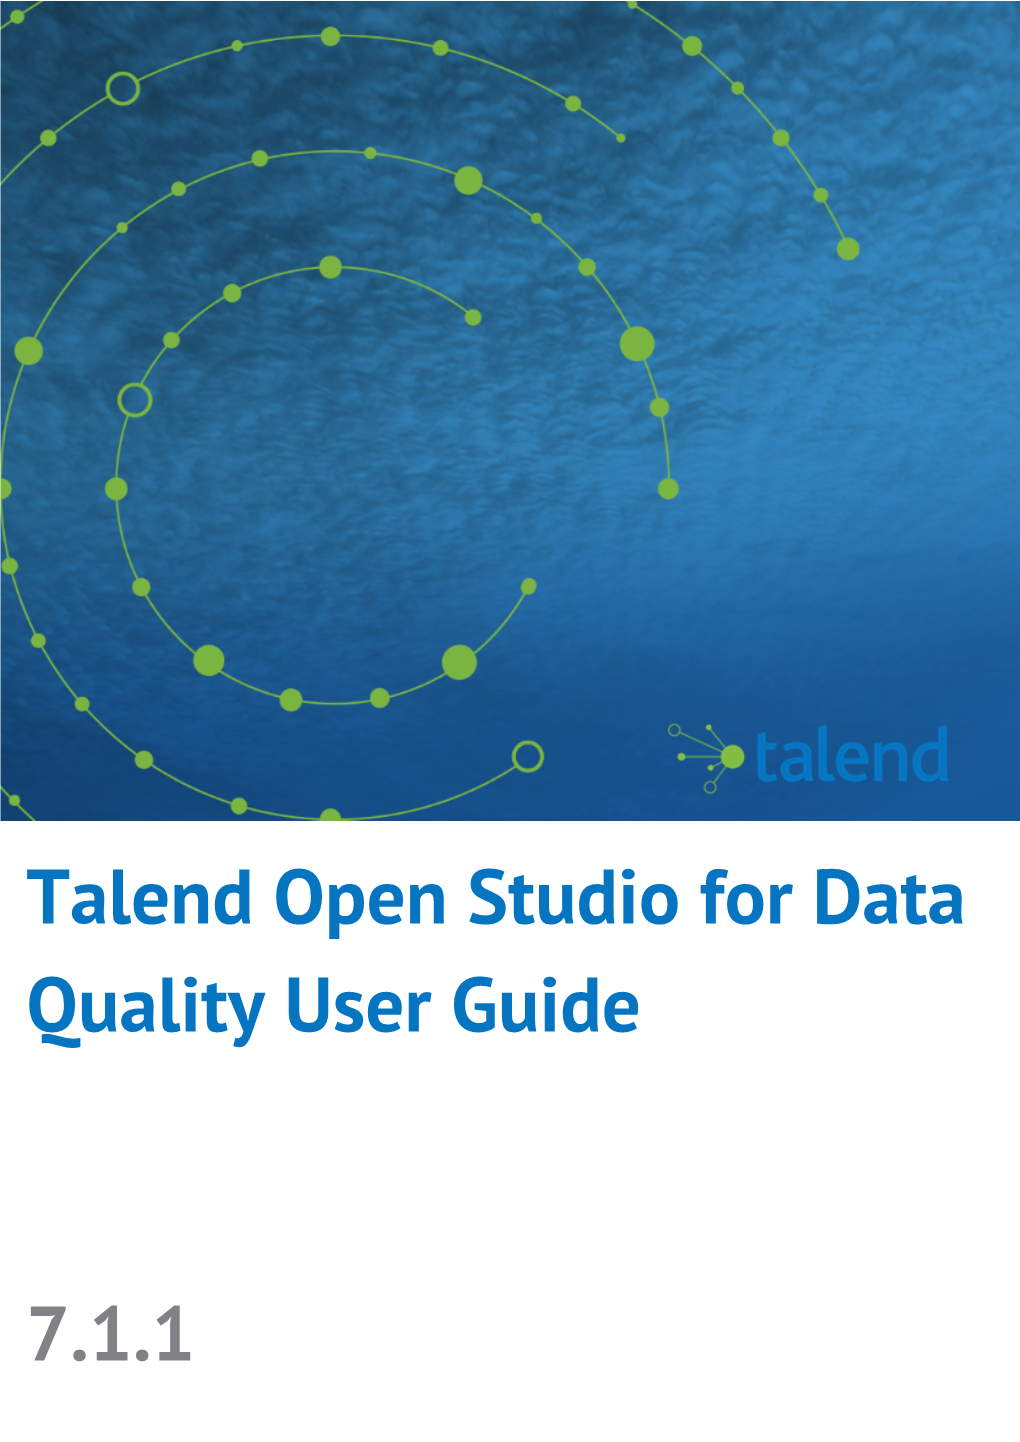 Talend Open Studio for Data Quality User Guide